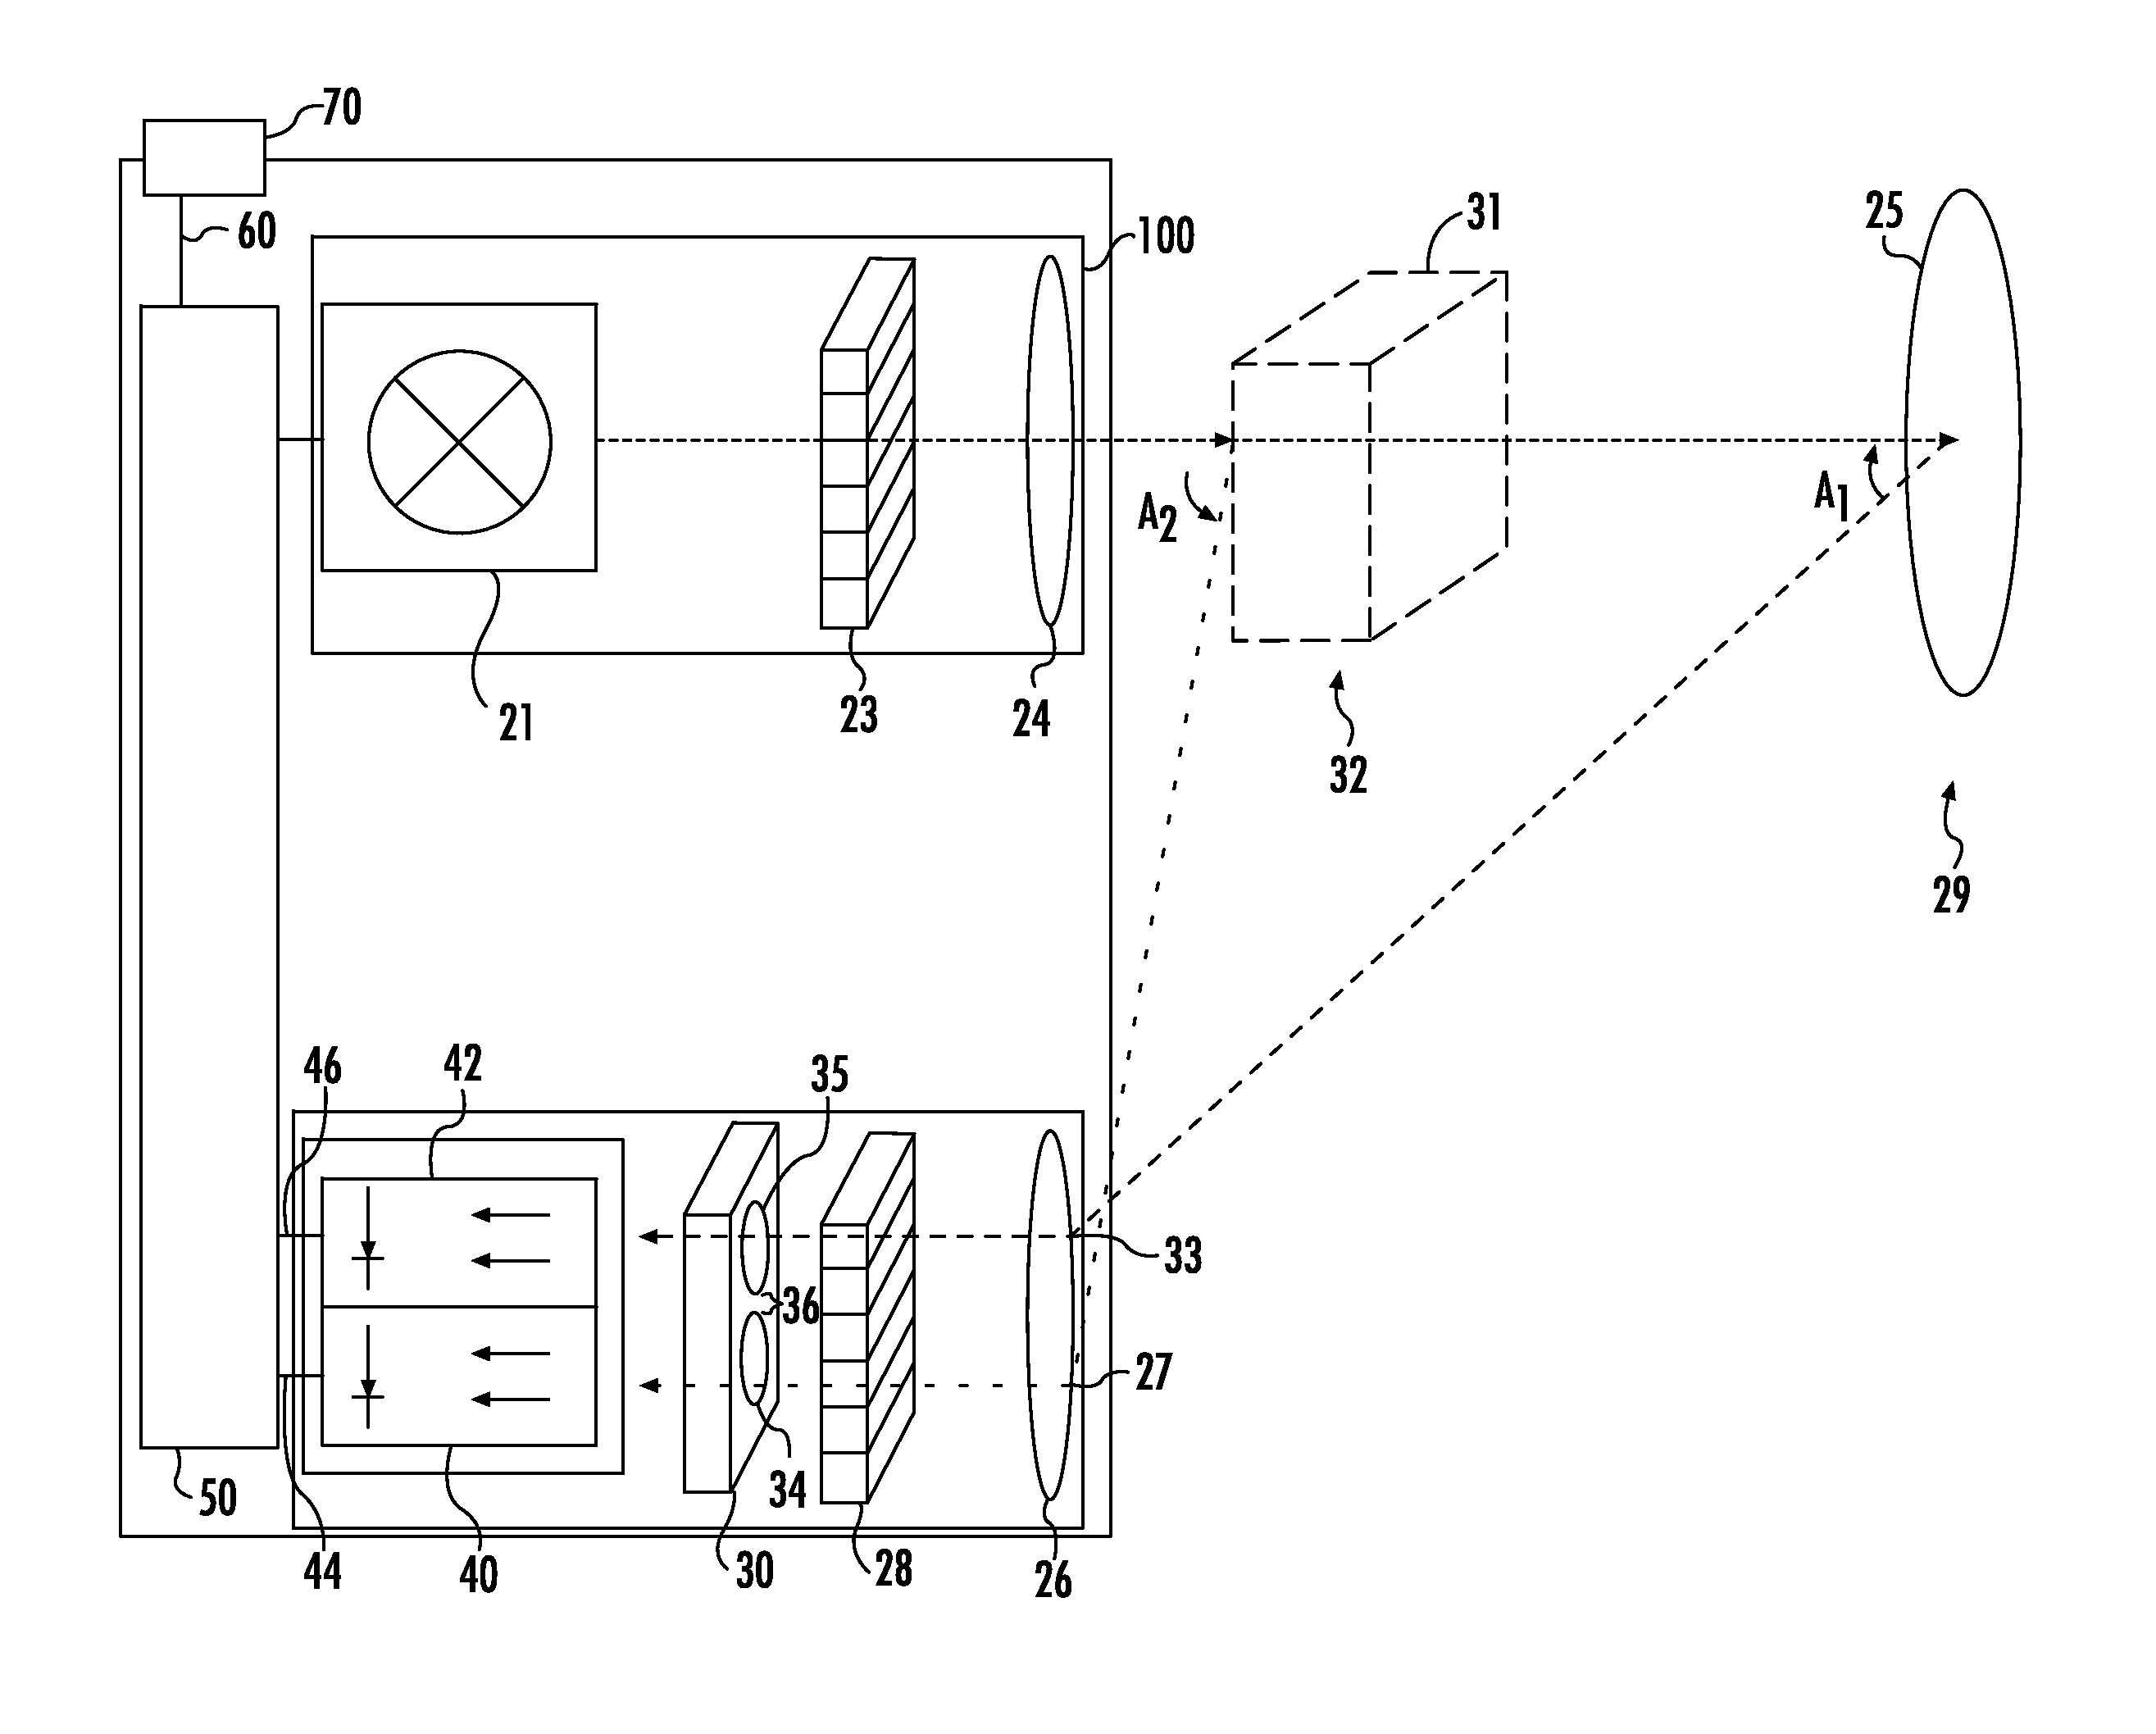 Method and system for sensing light reflective surfaces in a reflective photo-electric sensing system